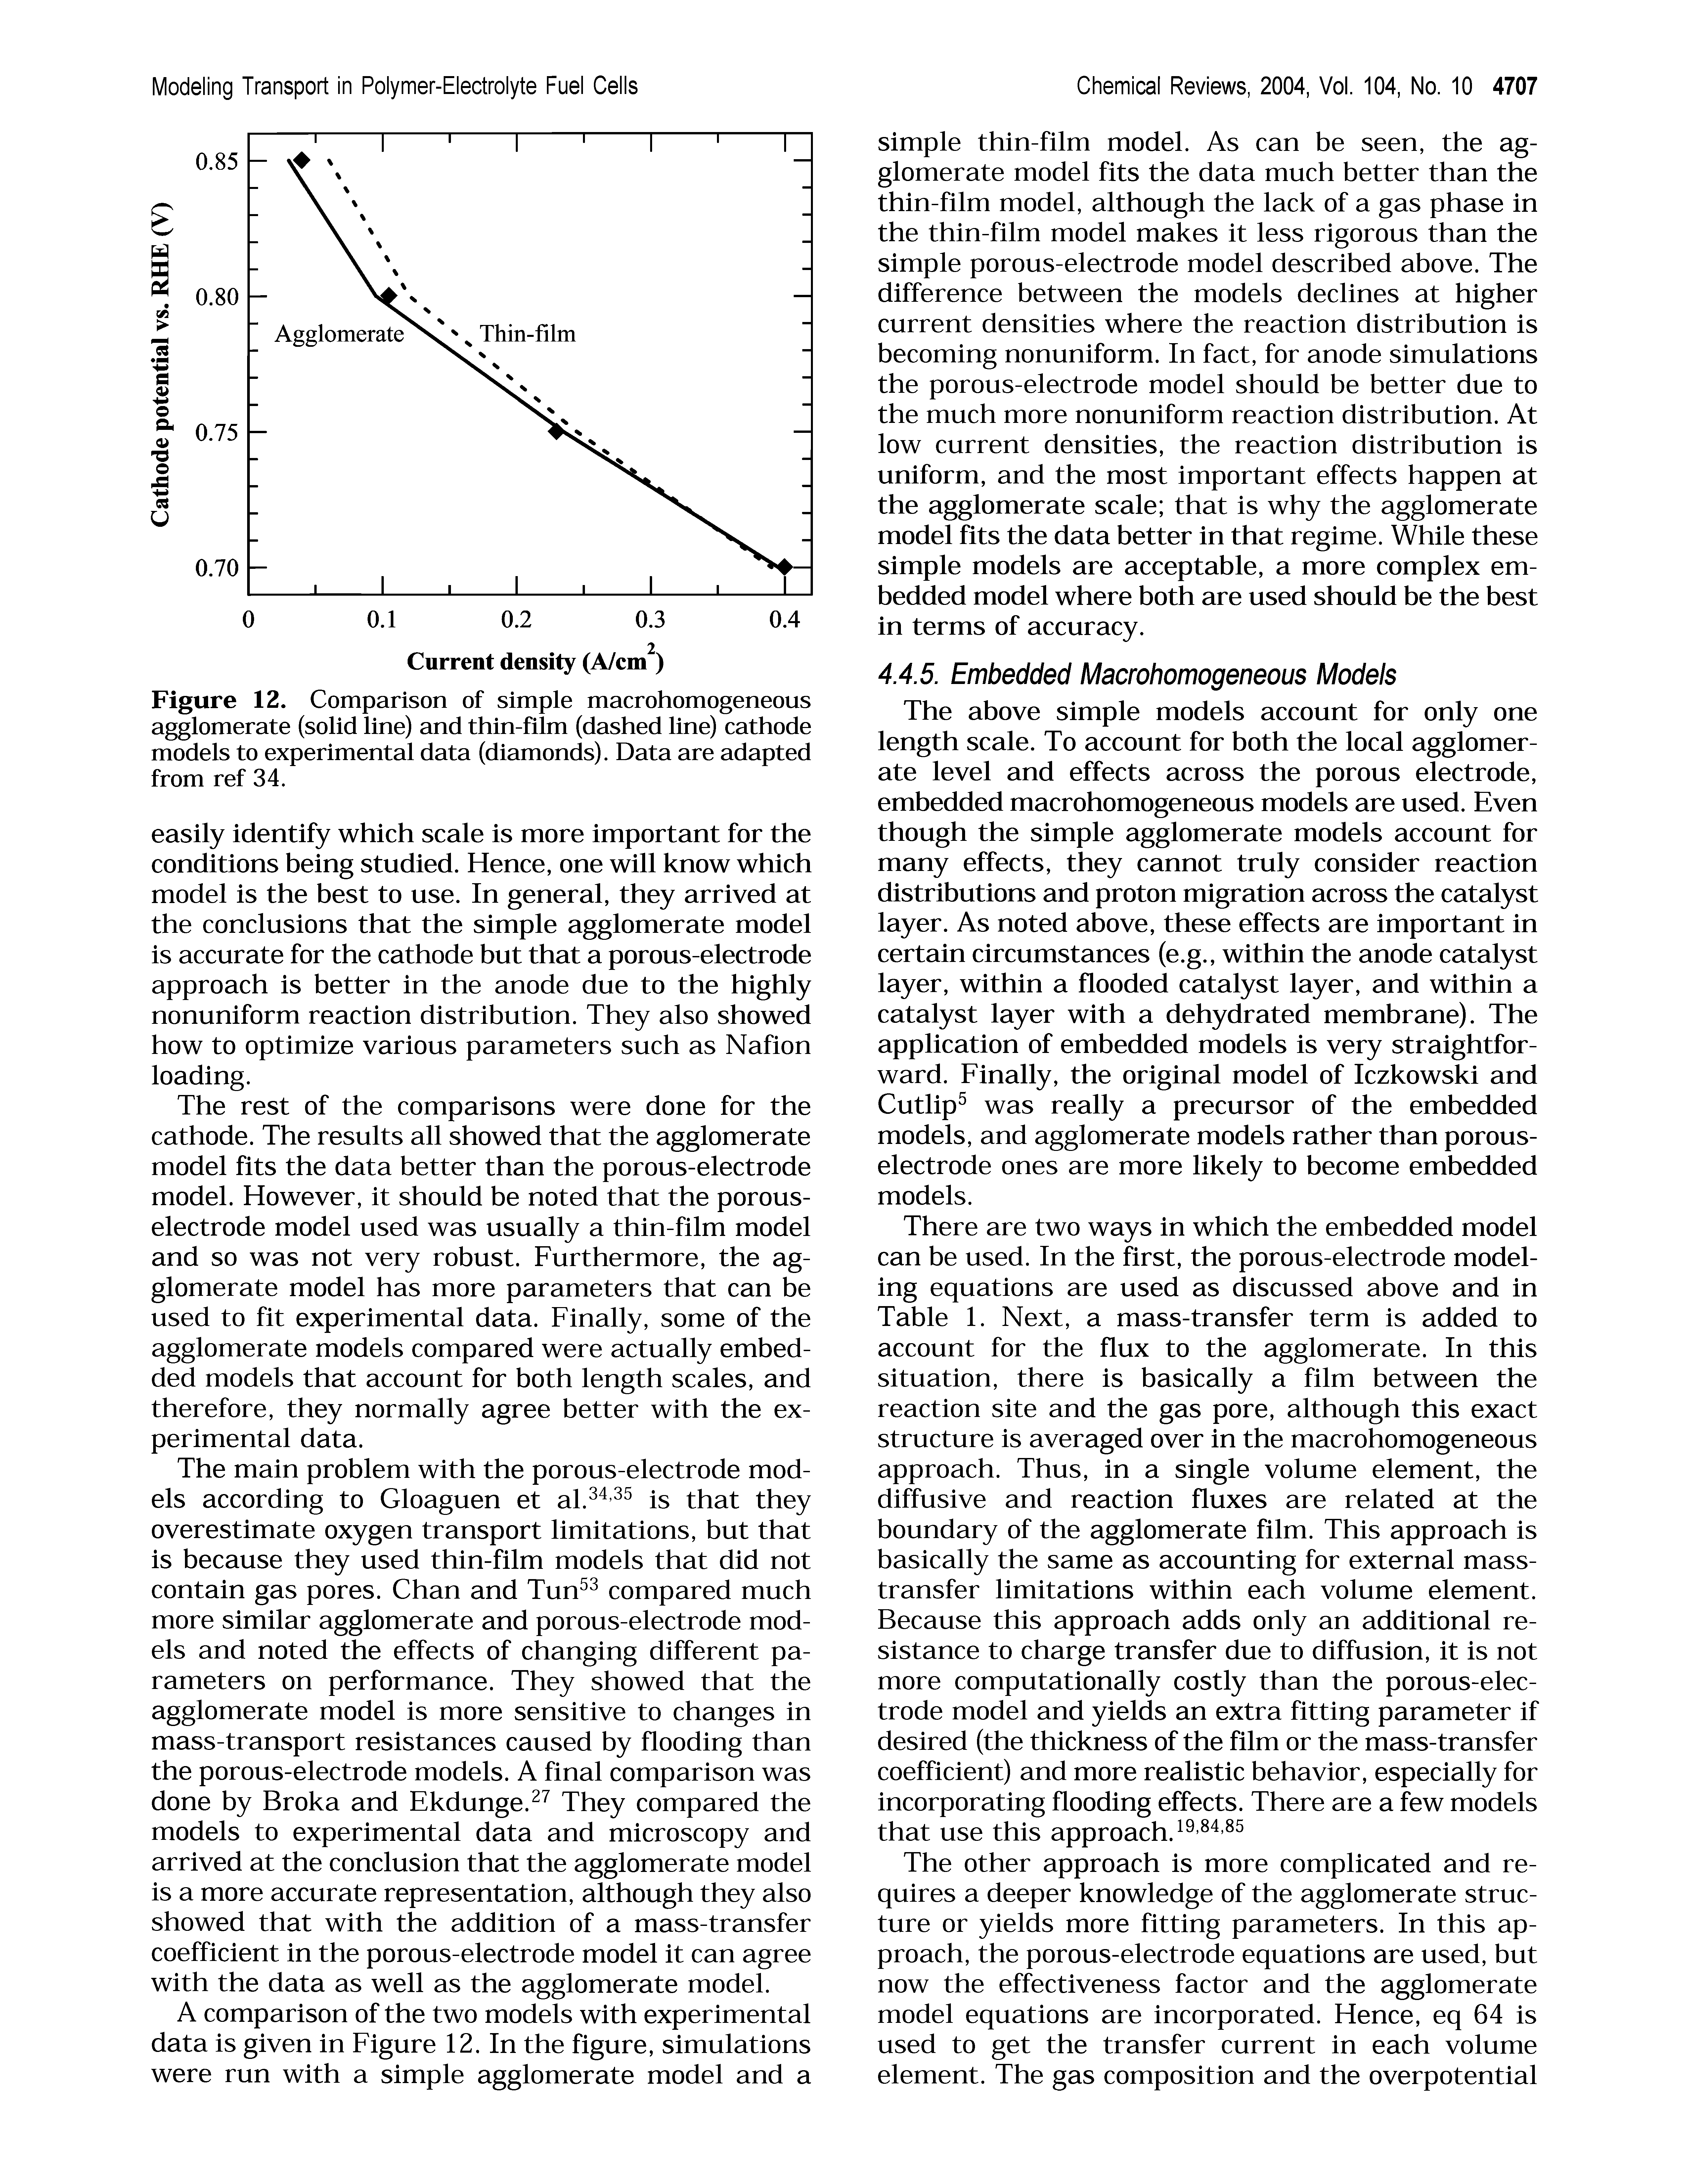 Figure 12. Comparison of simple macrohomogeneous agglomerate (solid line) and thin-film (dashed line) cathode models to experimental data (diamonds). Data are adapted from ref 34.